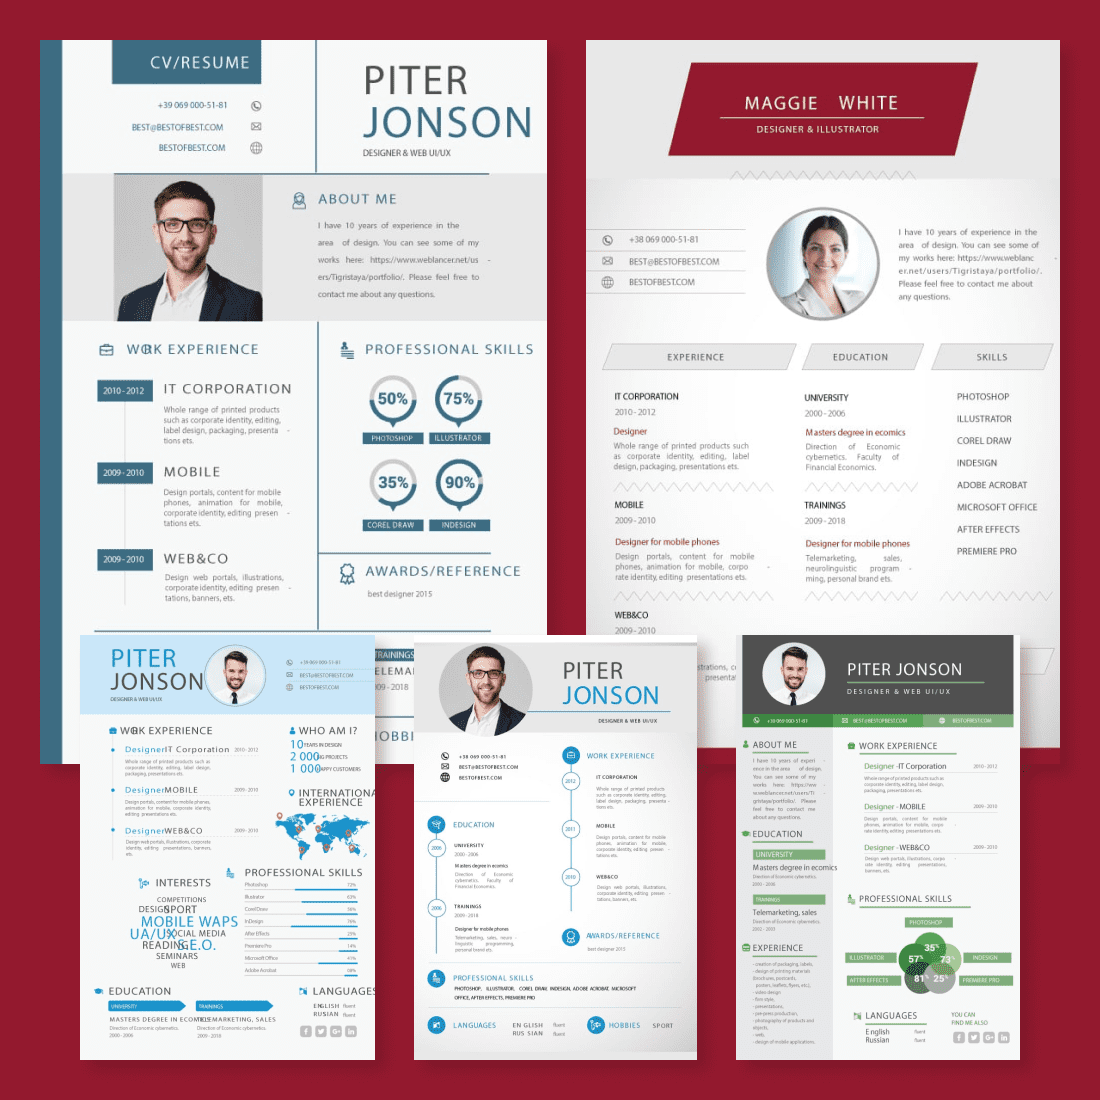 Set of three different resumes with a red background.